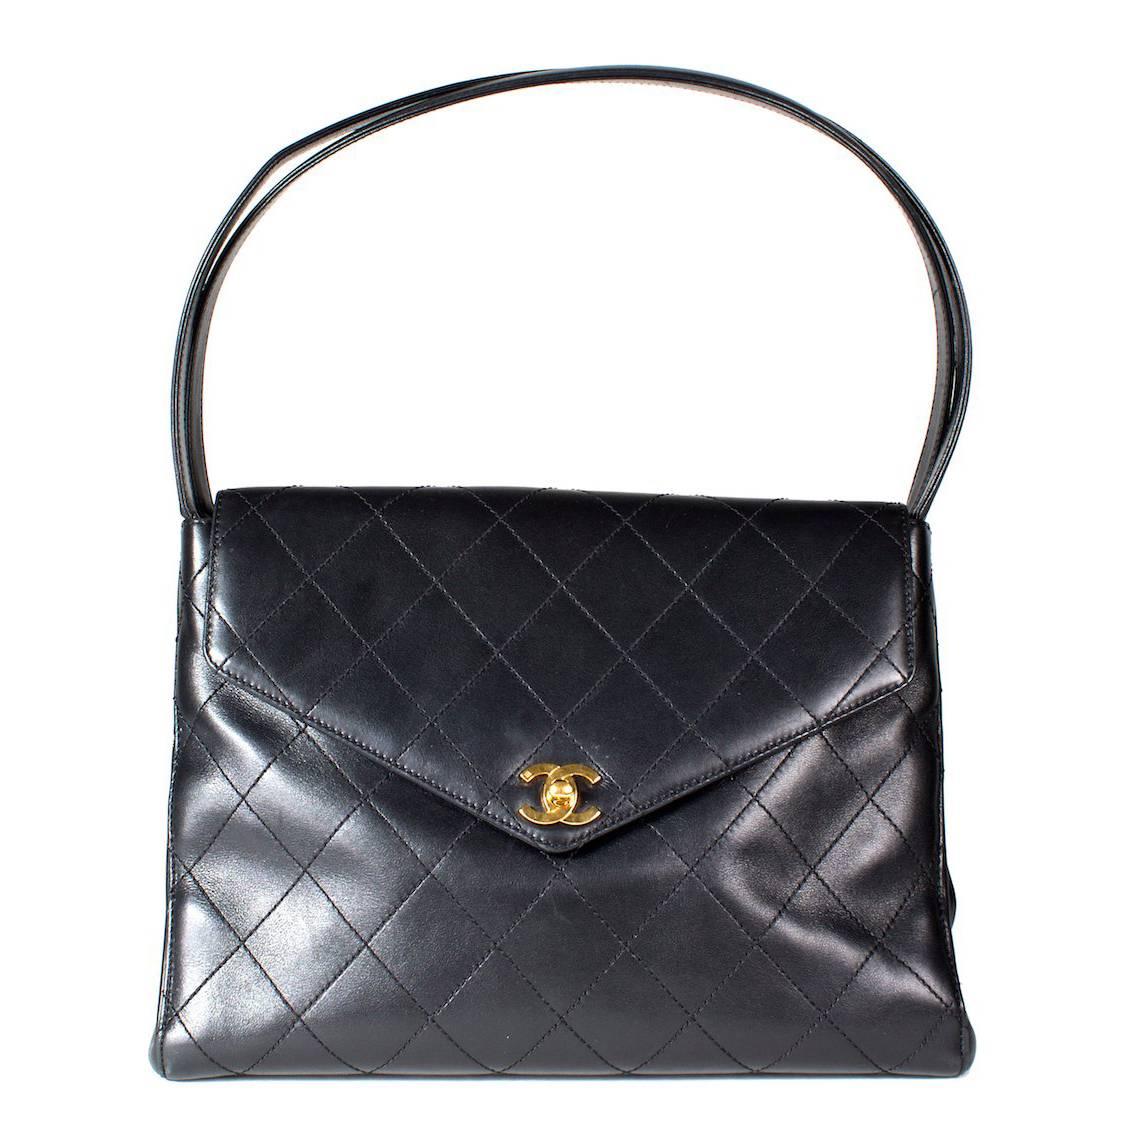 Chanel Quilted Black Leather Bag